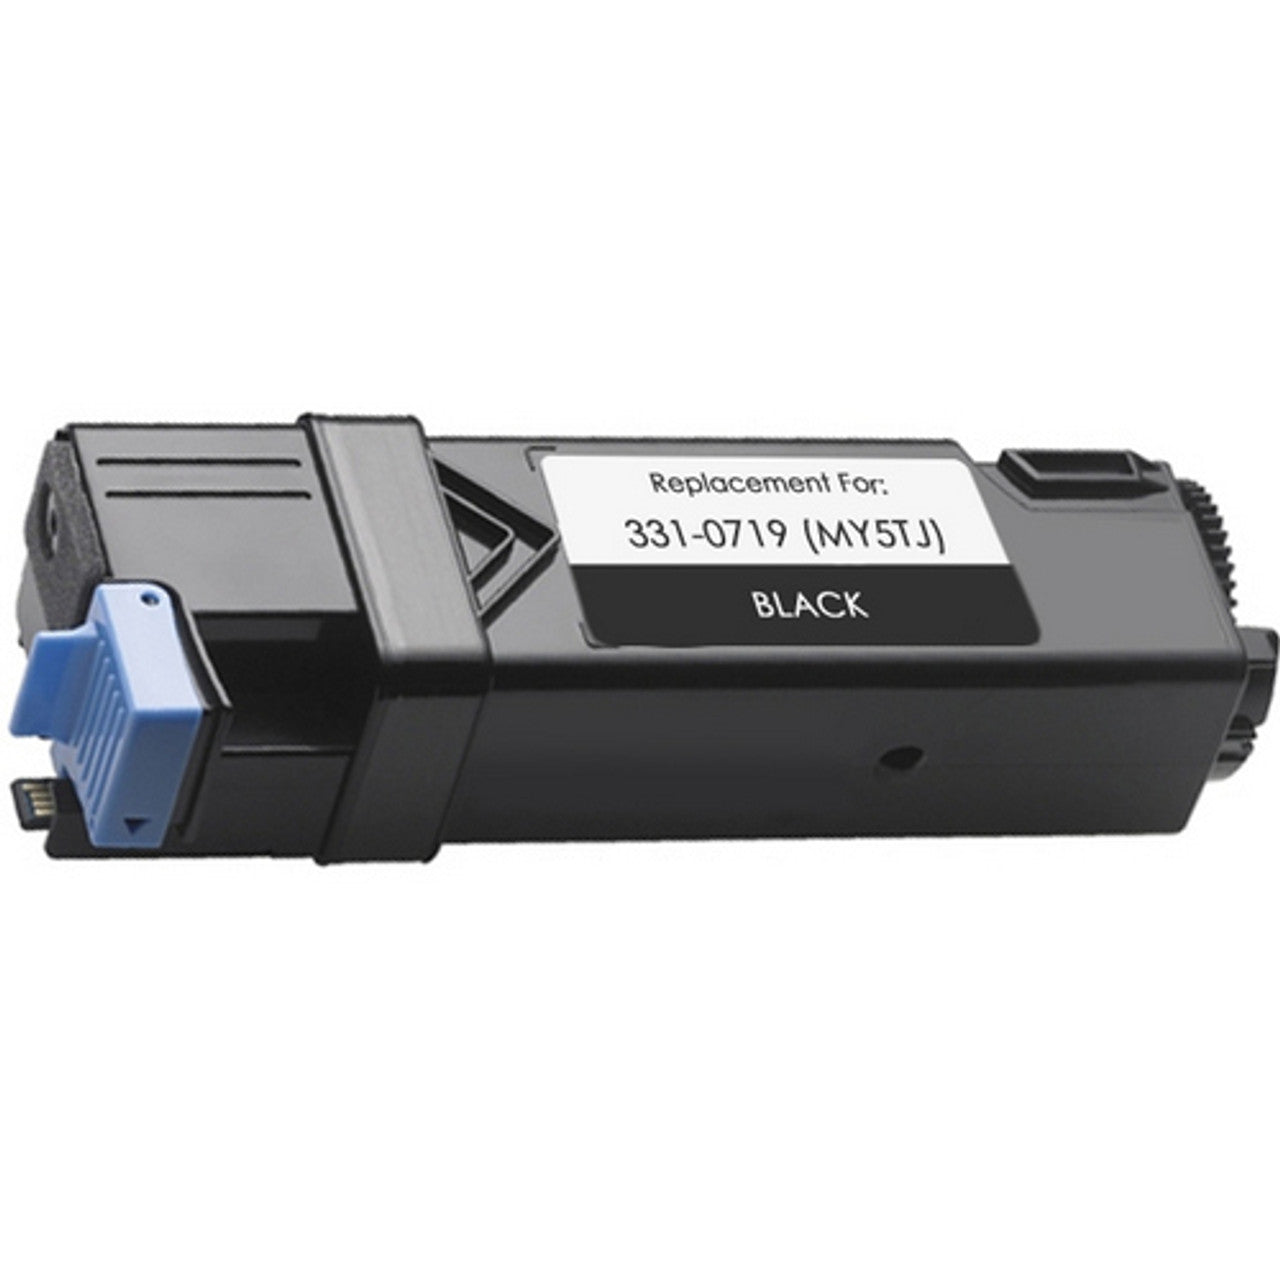 ICU Dell 2150 Series Black Compatible Toner Cartridge N51XP (331-0719), High Yield 3,000 pages